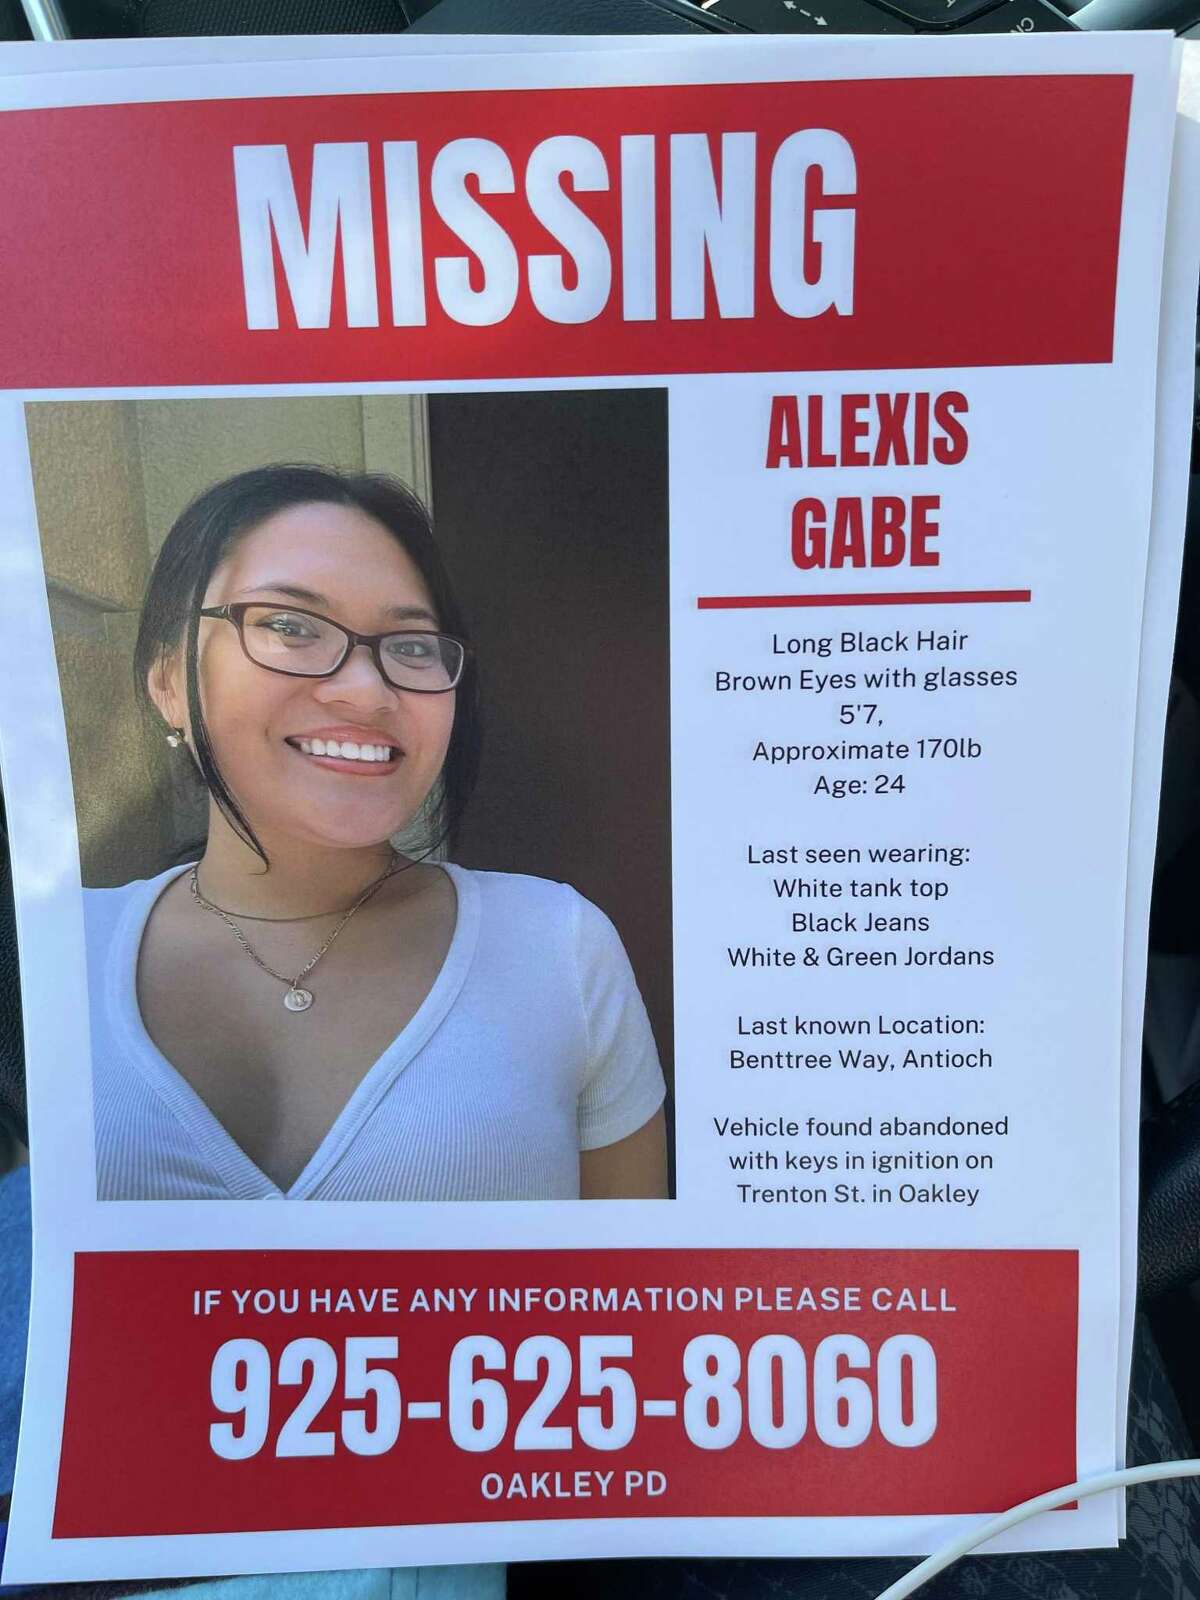 Alexis Gabe case: Bones found in Sierra were not her remains, officials say. A missing-person poster for Alexis Gabe, a 24-year-old Bay Area woman missing for months.